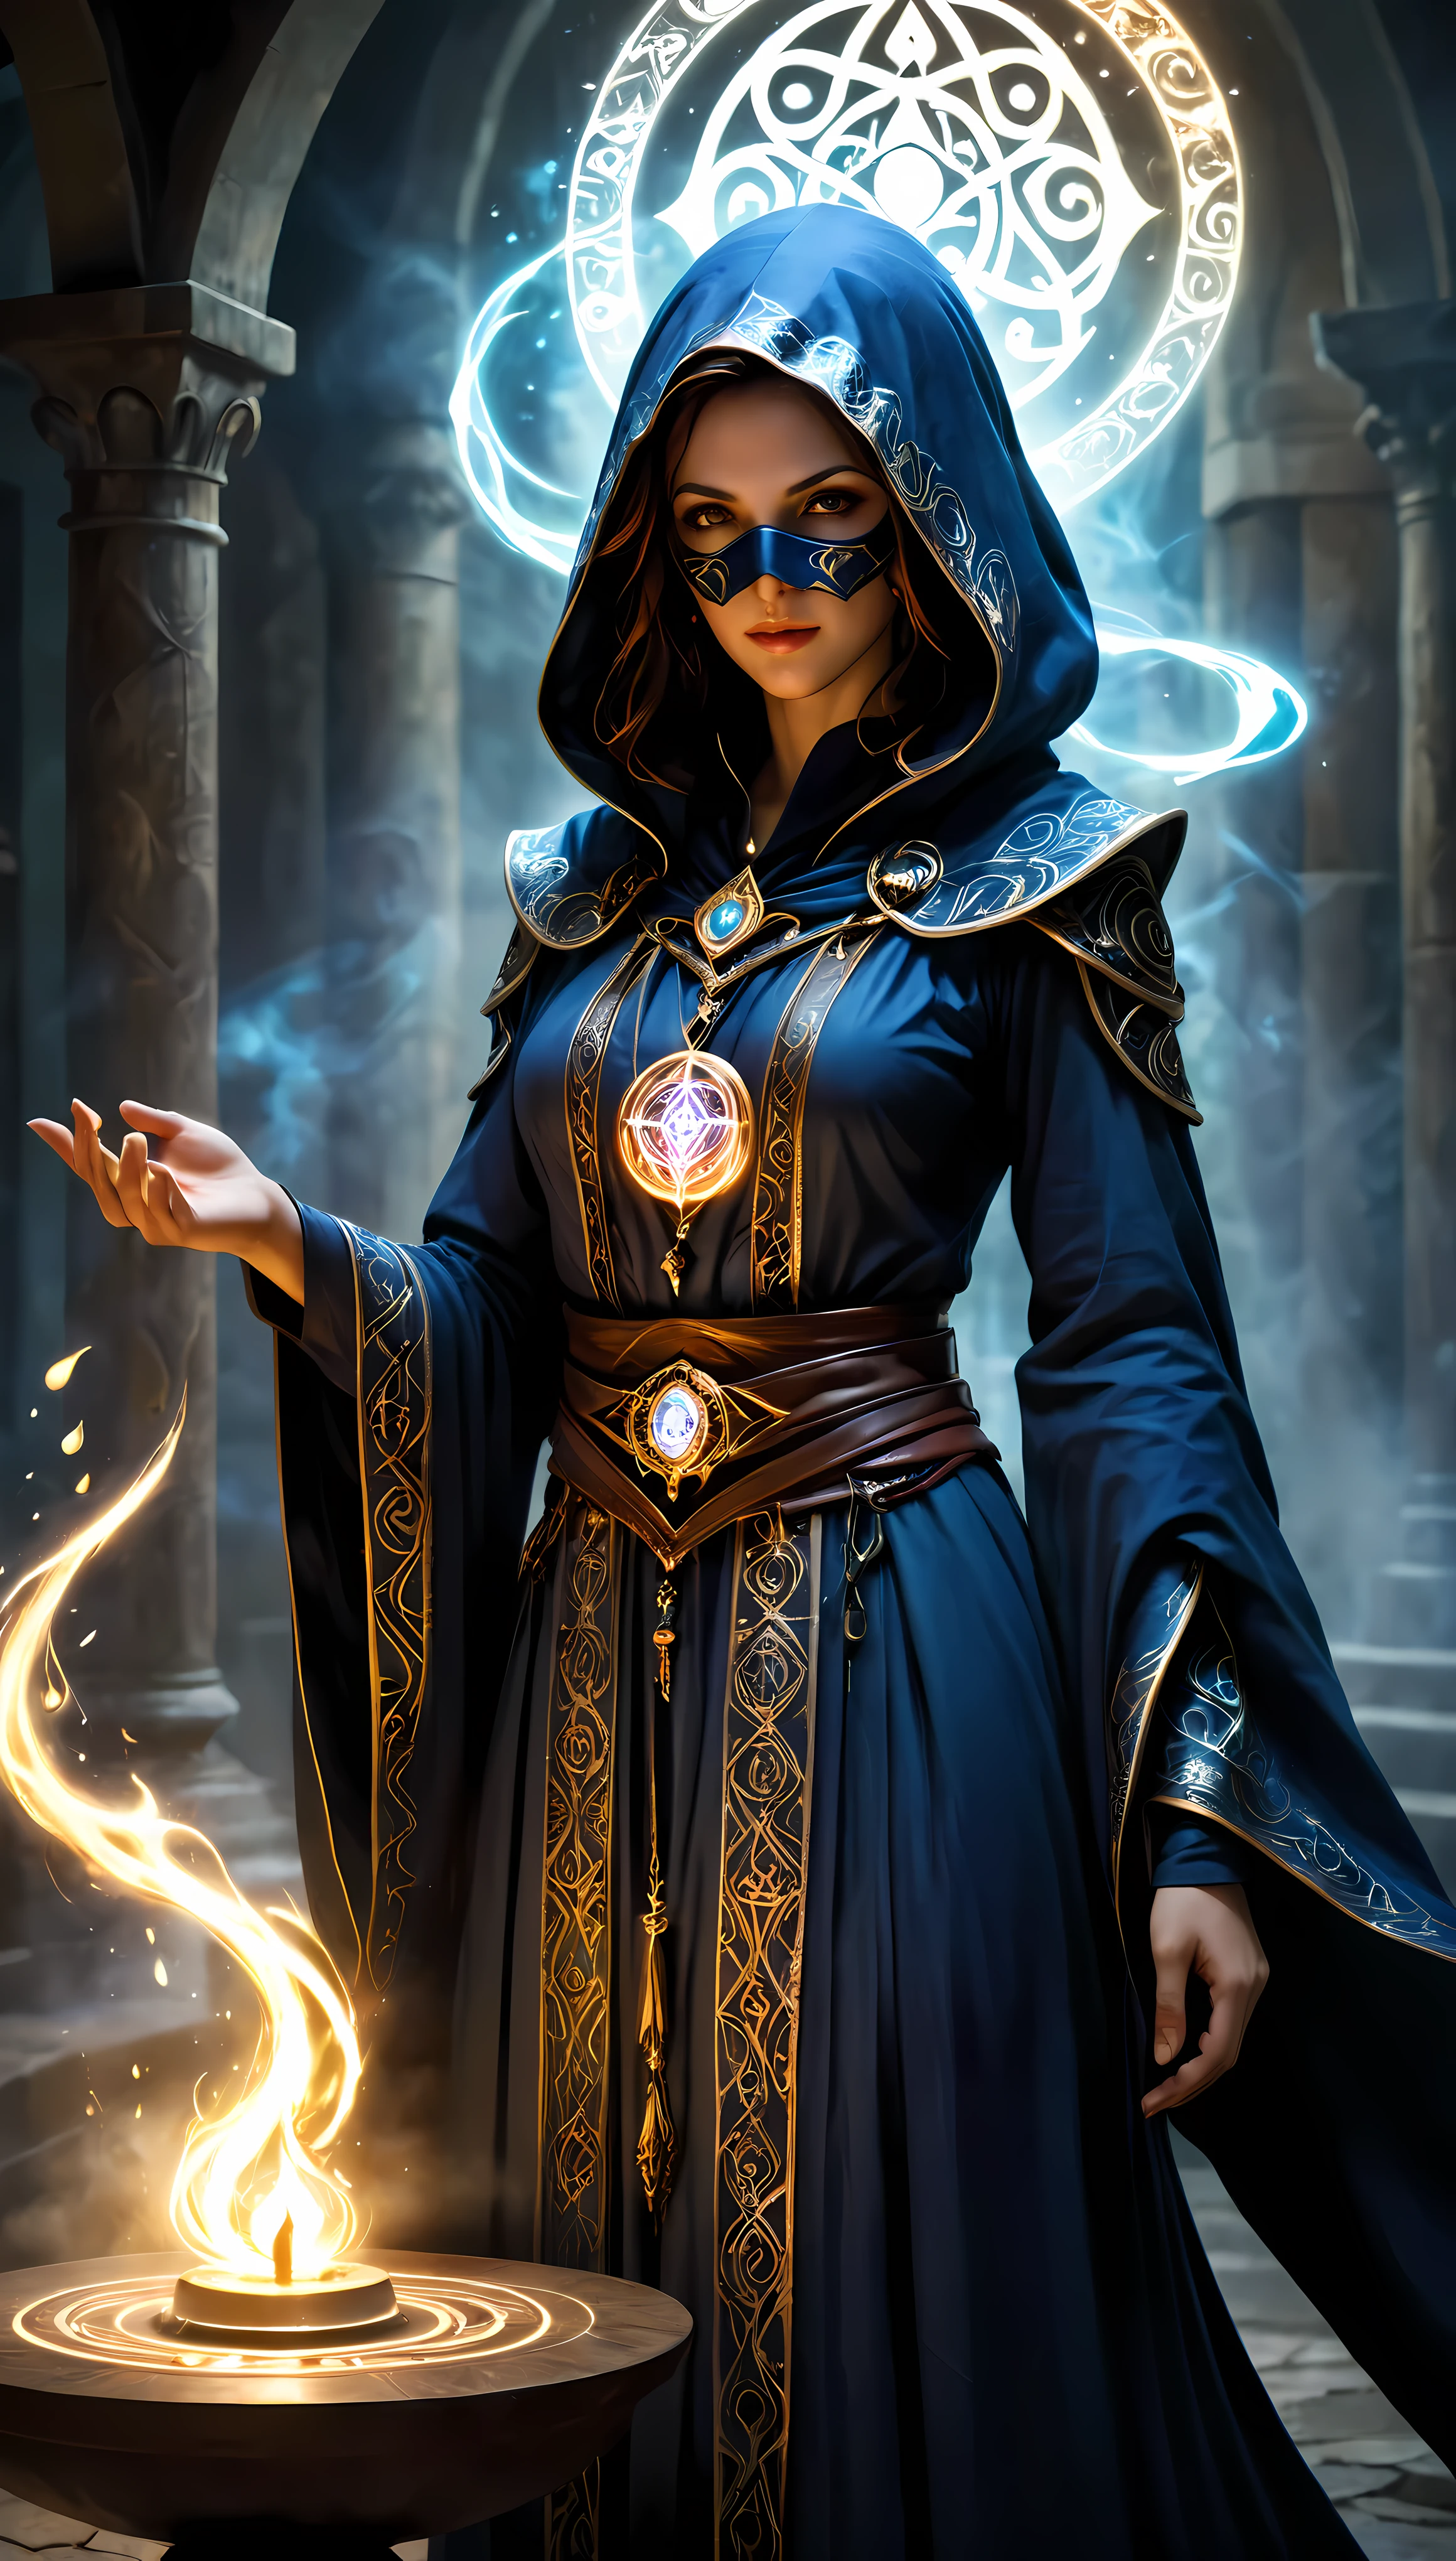 Title: "Veiled Enchantment: Conjuring the Magic Circle with a Masked Mage"

Prompt:

1. Begin by crafting a masked female mage: standing tall and imposing, her features obscured by an ornate mask adorned with intricate designs.

2. Design the mage's attire: flowing robes embellished with symbols and sigils, hinting at her proficiency in the arcane arts.

3. Render the mask with realism and detail, incorporating subtle textures and reflections to convey its craftsmanship and mystique.

4. Position the mage above the magic circle, her stance commanding and poised, as she prepares to unleash her powers upon the world.

5. Create the magic circle with meticulous precision: concentric rings of glowing runes and inscriptions etched into the ground, radiating with ethereal light.

6. Ensure the runes and inscriptions are legible yet cryptic, hinting at ancient languages and forgotten spells.

7. Illuminate the magic circle with a soft, pulsating glow, casting shadows and highlights that dance across the surrounding environment.

8. Integrate the mage's presence into the scene: subtle gestures and movements that indicate her control over the magic being channeled.

9. Consider the interaction between the mage and the magic circle: the intensity of her focus, the flow of energy between them, and the power she commands.

10. Surround the mage with elements of mystery and intrigue: swirling mists, flickering flames, or spectral apparitions that enhance the sense of enchantment.

11. Pay attention to lighting and shadows: position light sources to accentuate the mage's silhouette and the intricate details of the magic circle.

12. Maintain a balance between realism and fantasy, ensuring that the masked mage and her mystical surroundings evoke a sense of wonder and awe.

13. Throughout the process, prioritize attention to detail, composition, and the portrayal of the masked mage's enigmatic presence and mastery of the arcane.